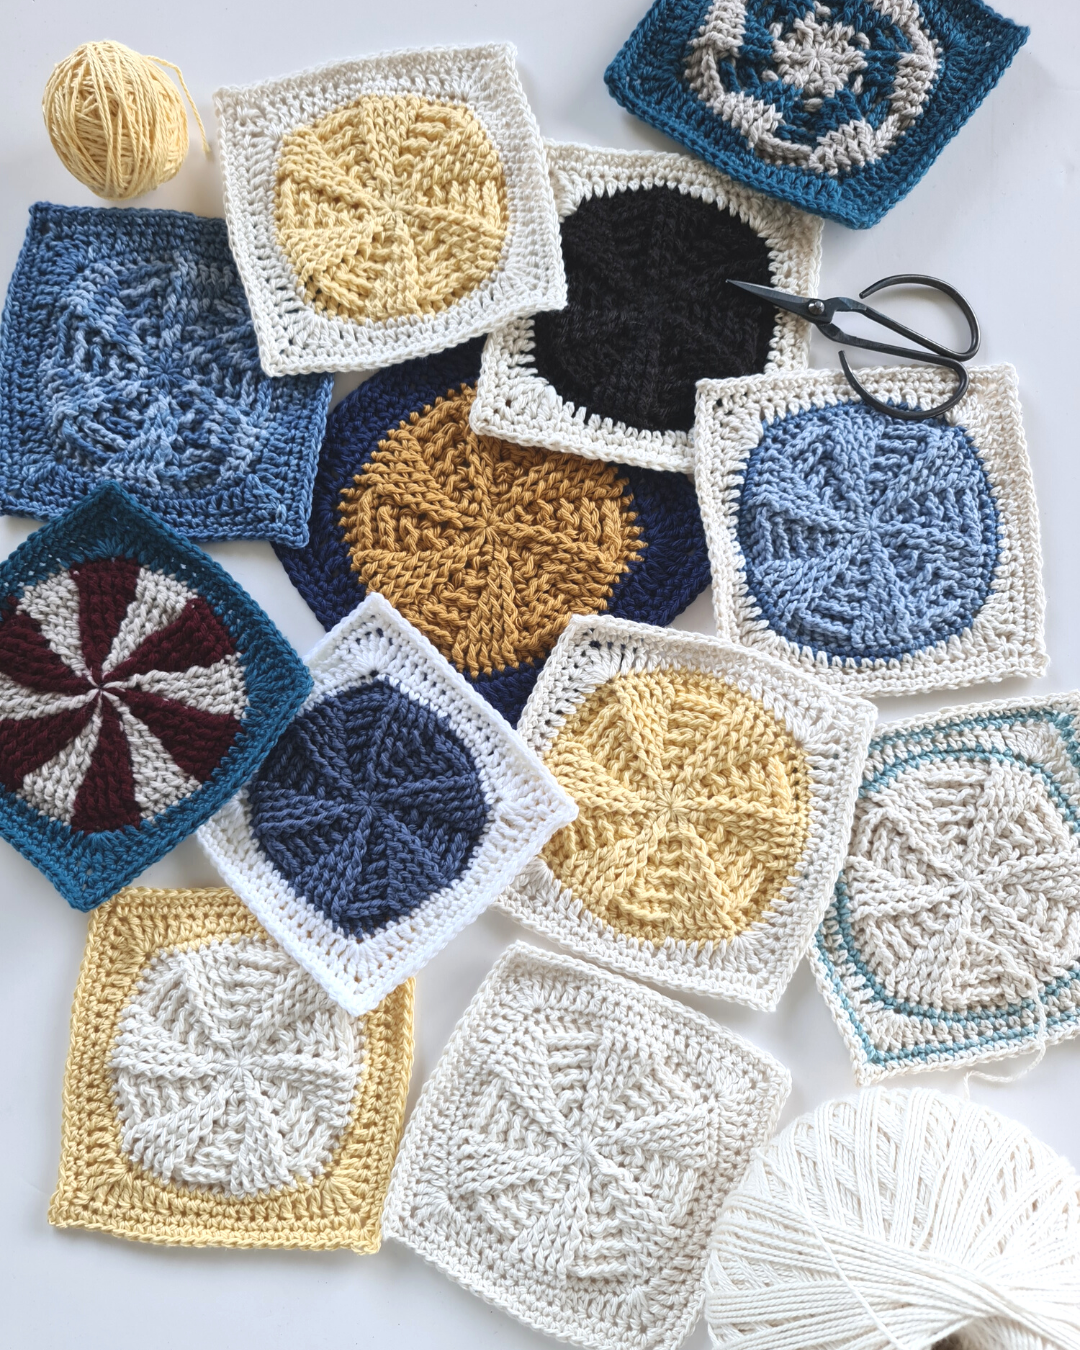 An assortment of Vinyl Revival Granny square crochet patterns by Shelley Husband with balls of yarn and a pair of black yarn scissors